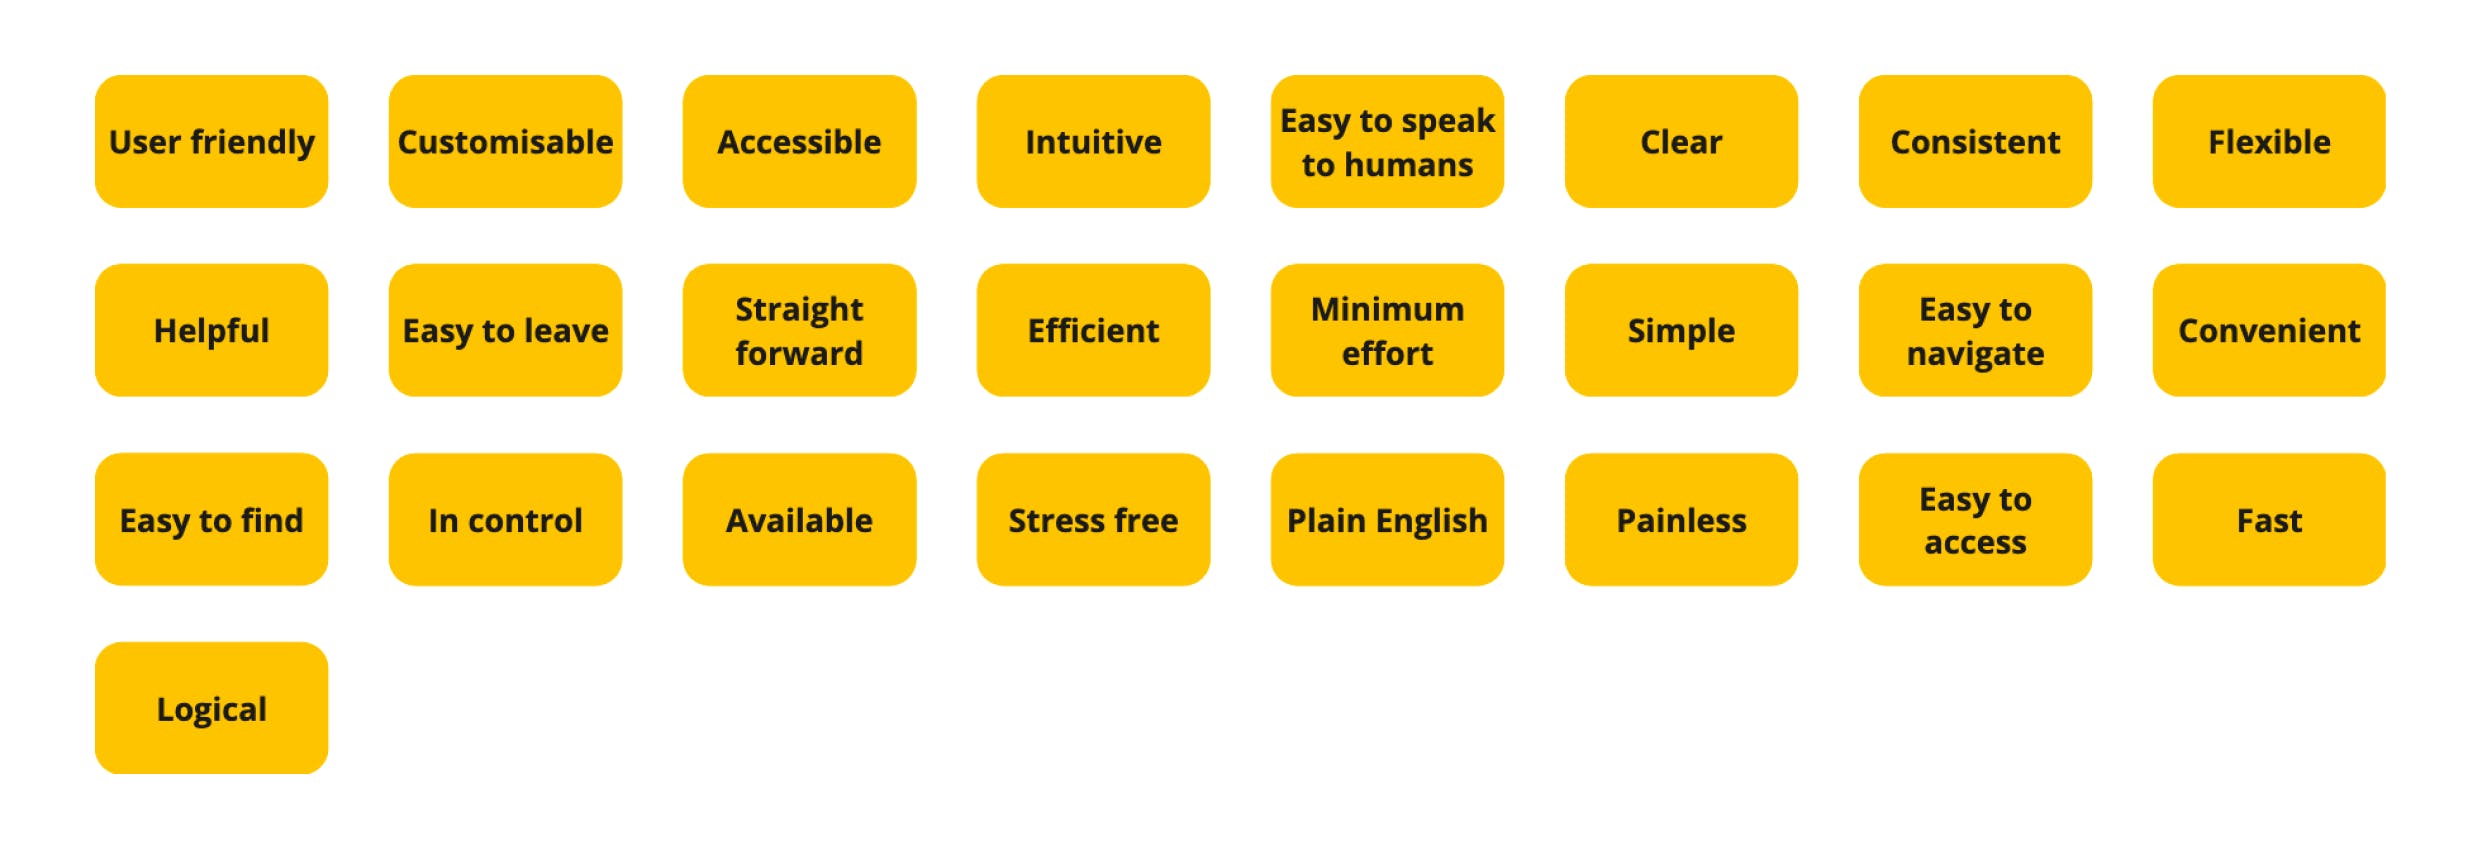 User friendly,
Customisable,
Accessible,
Intuitive,
Easy to speak to humans,
Clear,
Consistent,
Flexible,
Helpful,
Easy to leave,
Straightforward,
Efficient,
Minimum effort,
Simple,
Easy to navigate,
Convenient,
Easy to find,
In control,
Available,
Stress free,
Plain English,
Painless,
Easy to access,
Logical,